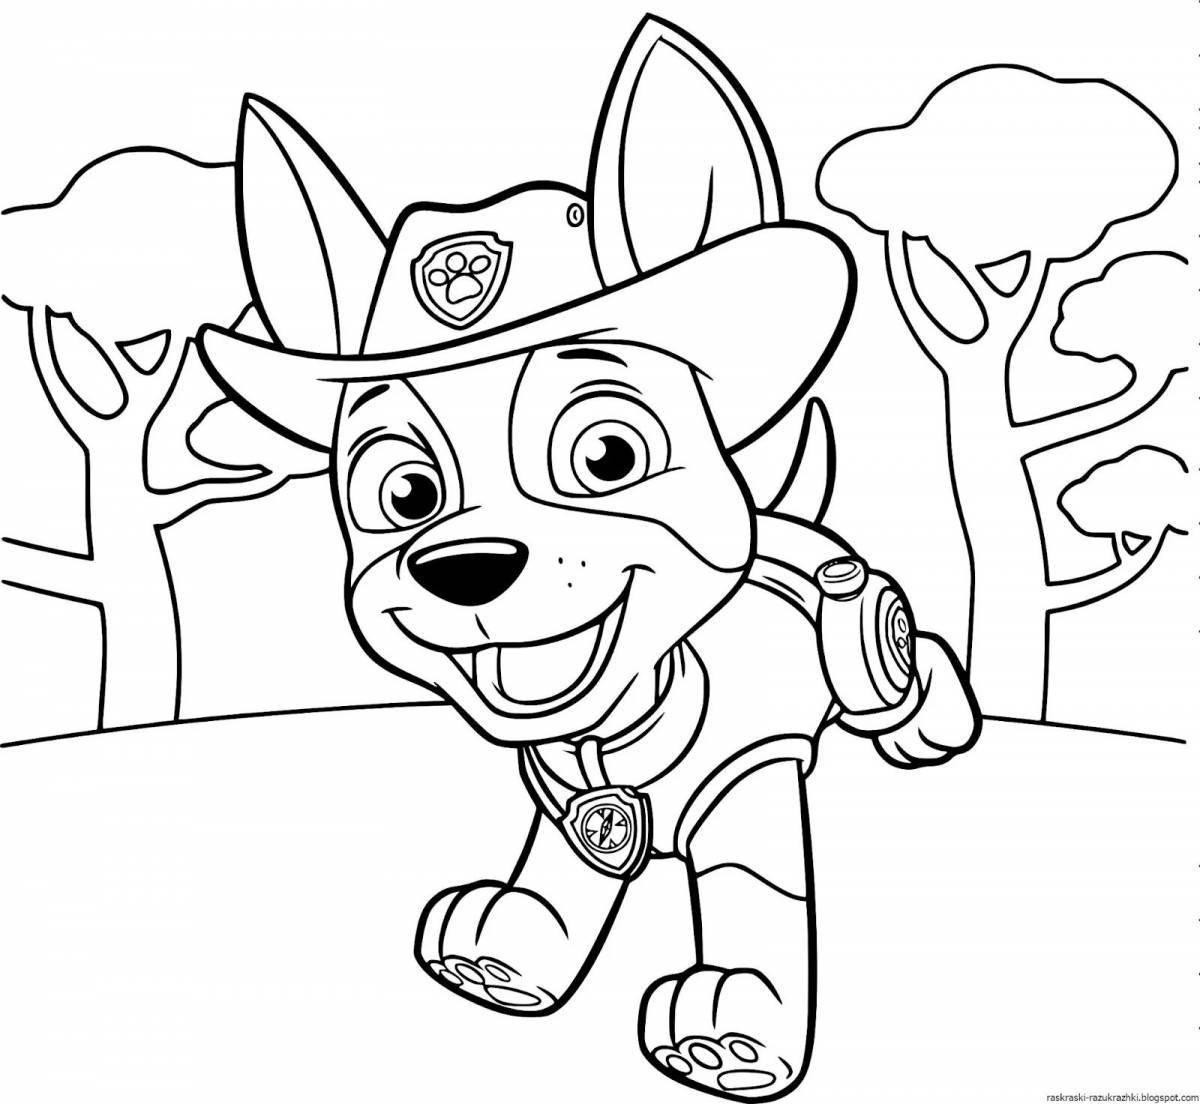 Radiant coloring page paw patrol baby